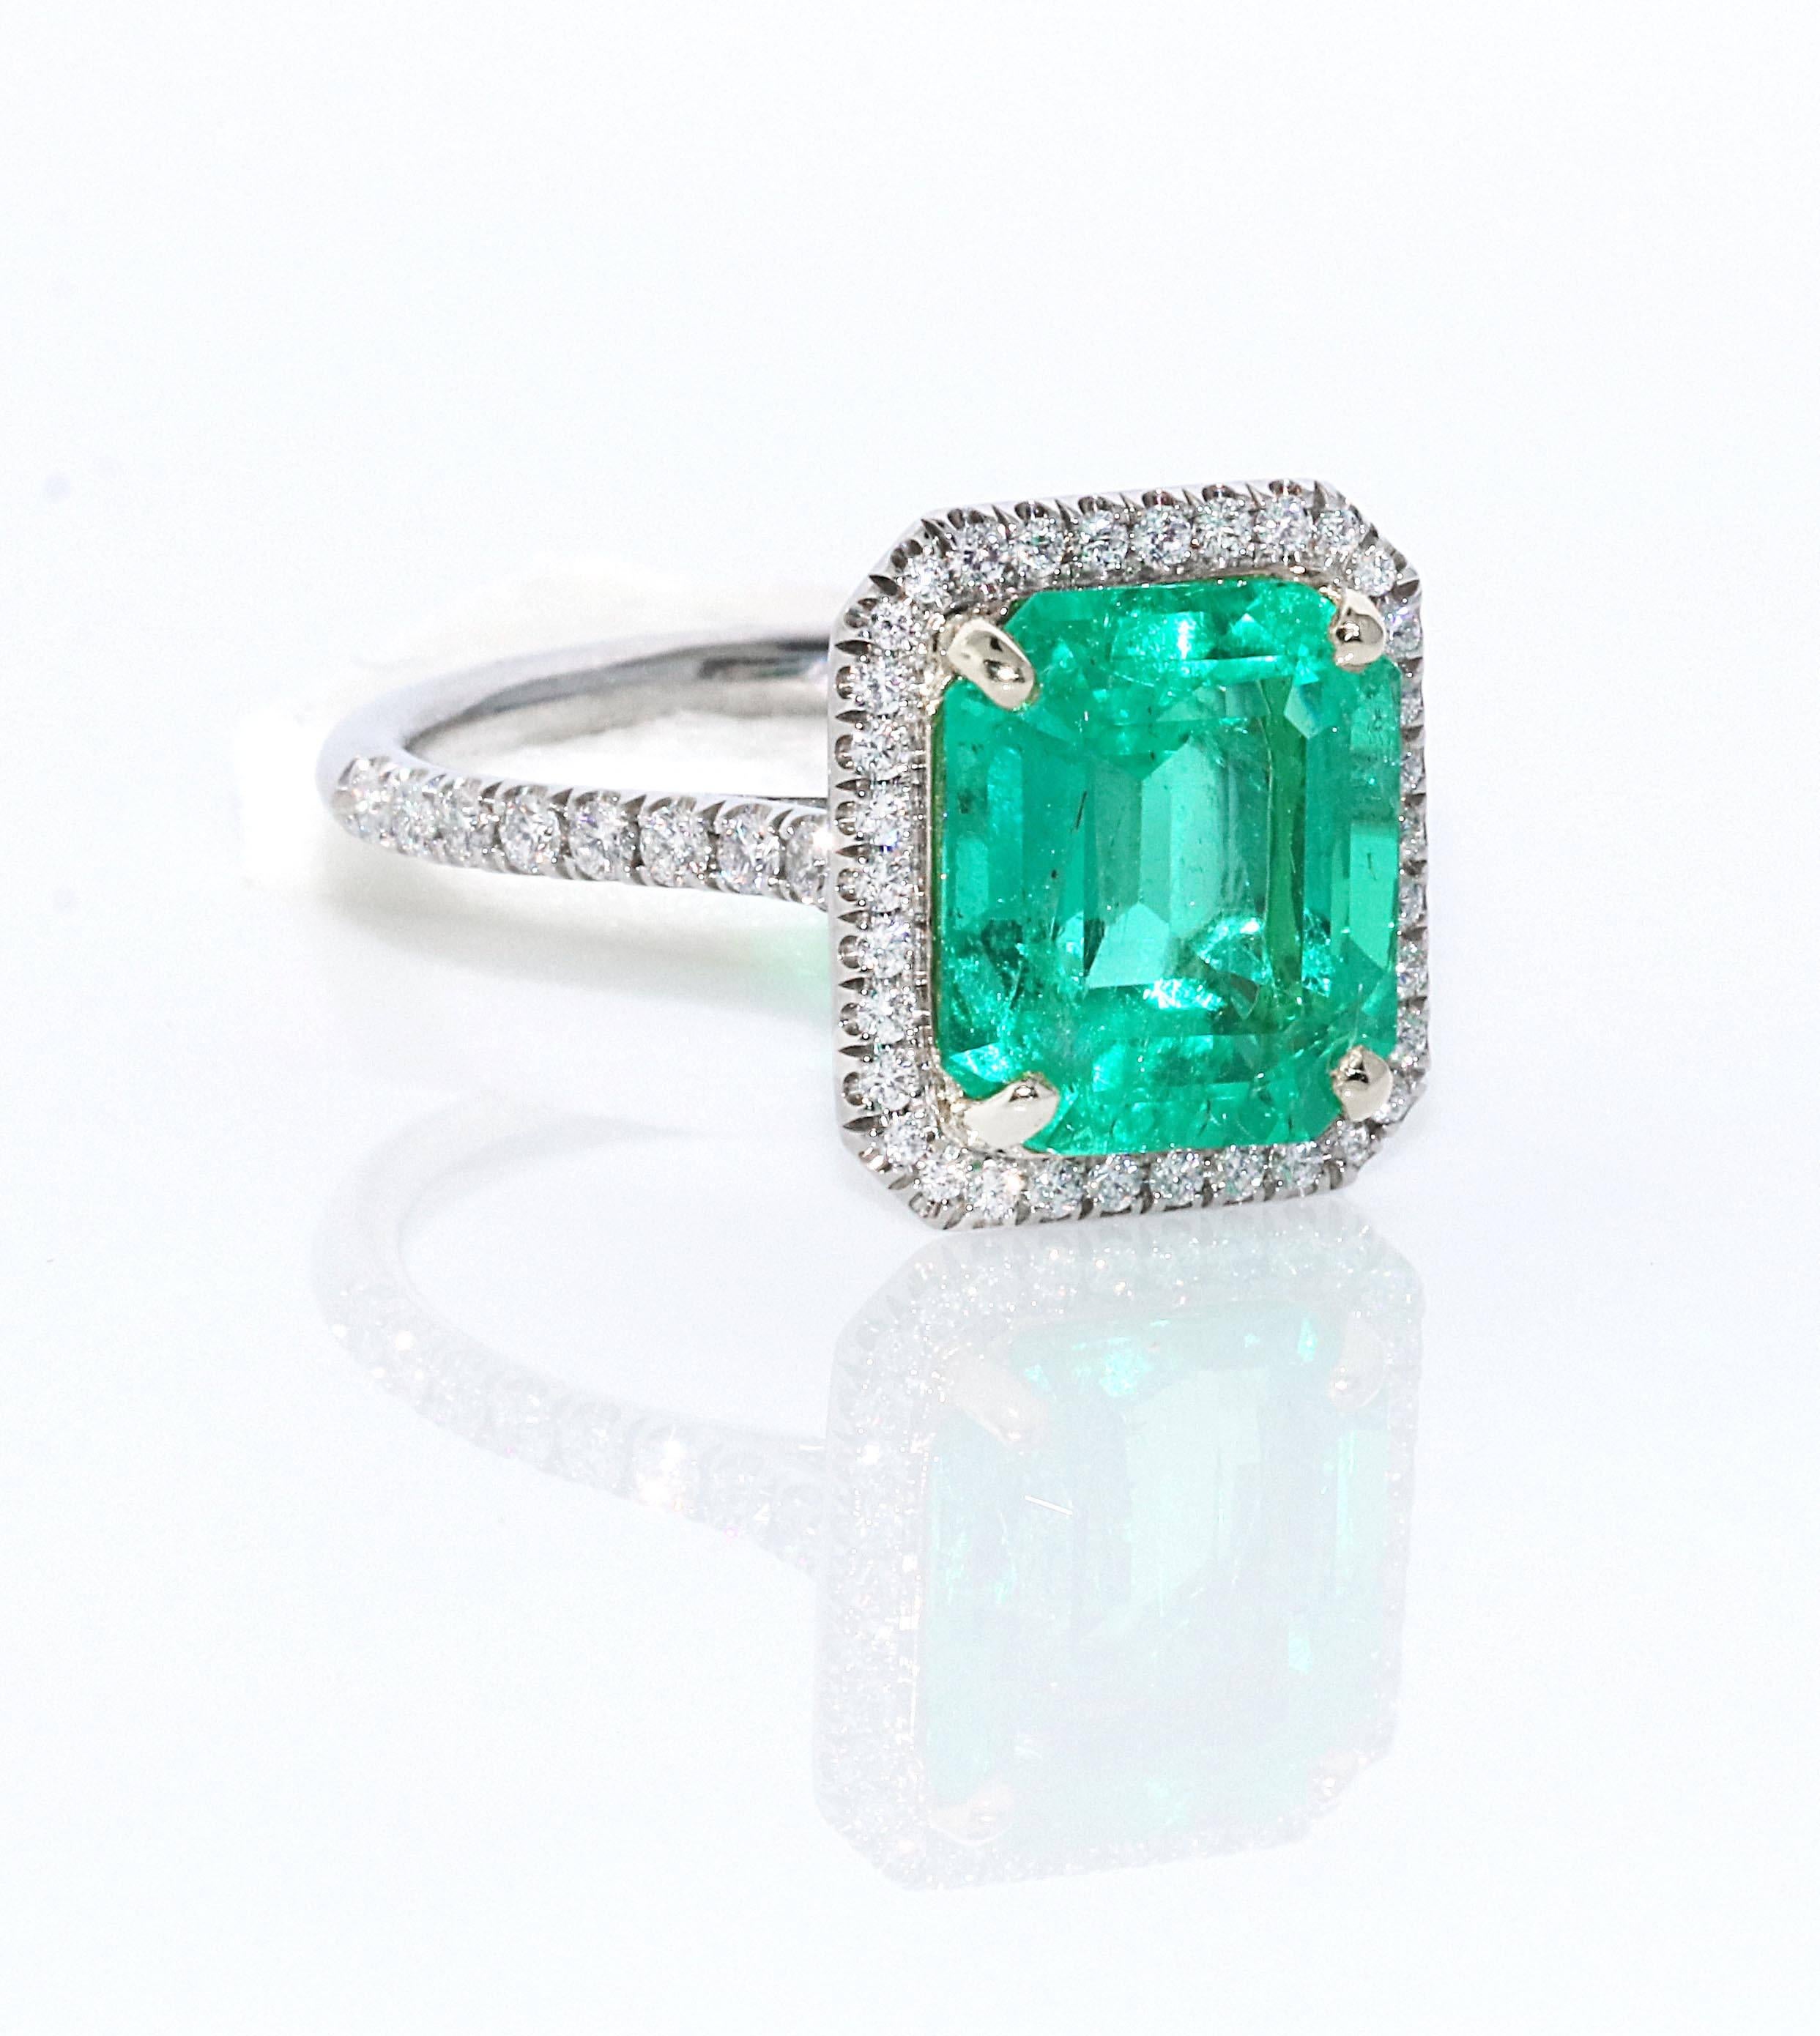 The most gorgeous bright green colored emerald cut emerald. This center emerald has a GIA certificate stating Colombian with minor enhancements. This means the stone is of the highest caliber of quality. Very few inclusions can be seen in the stone,